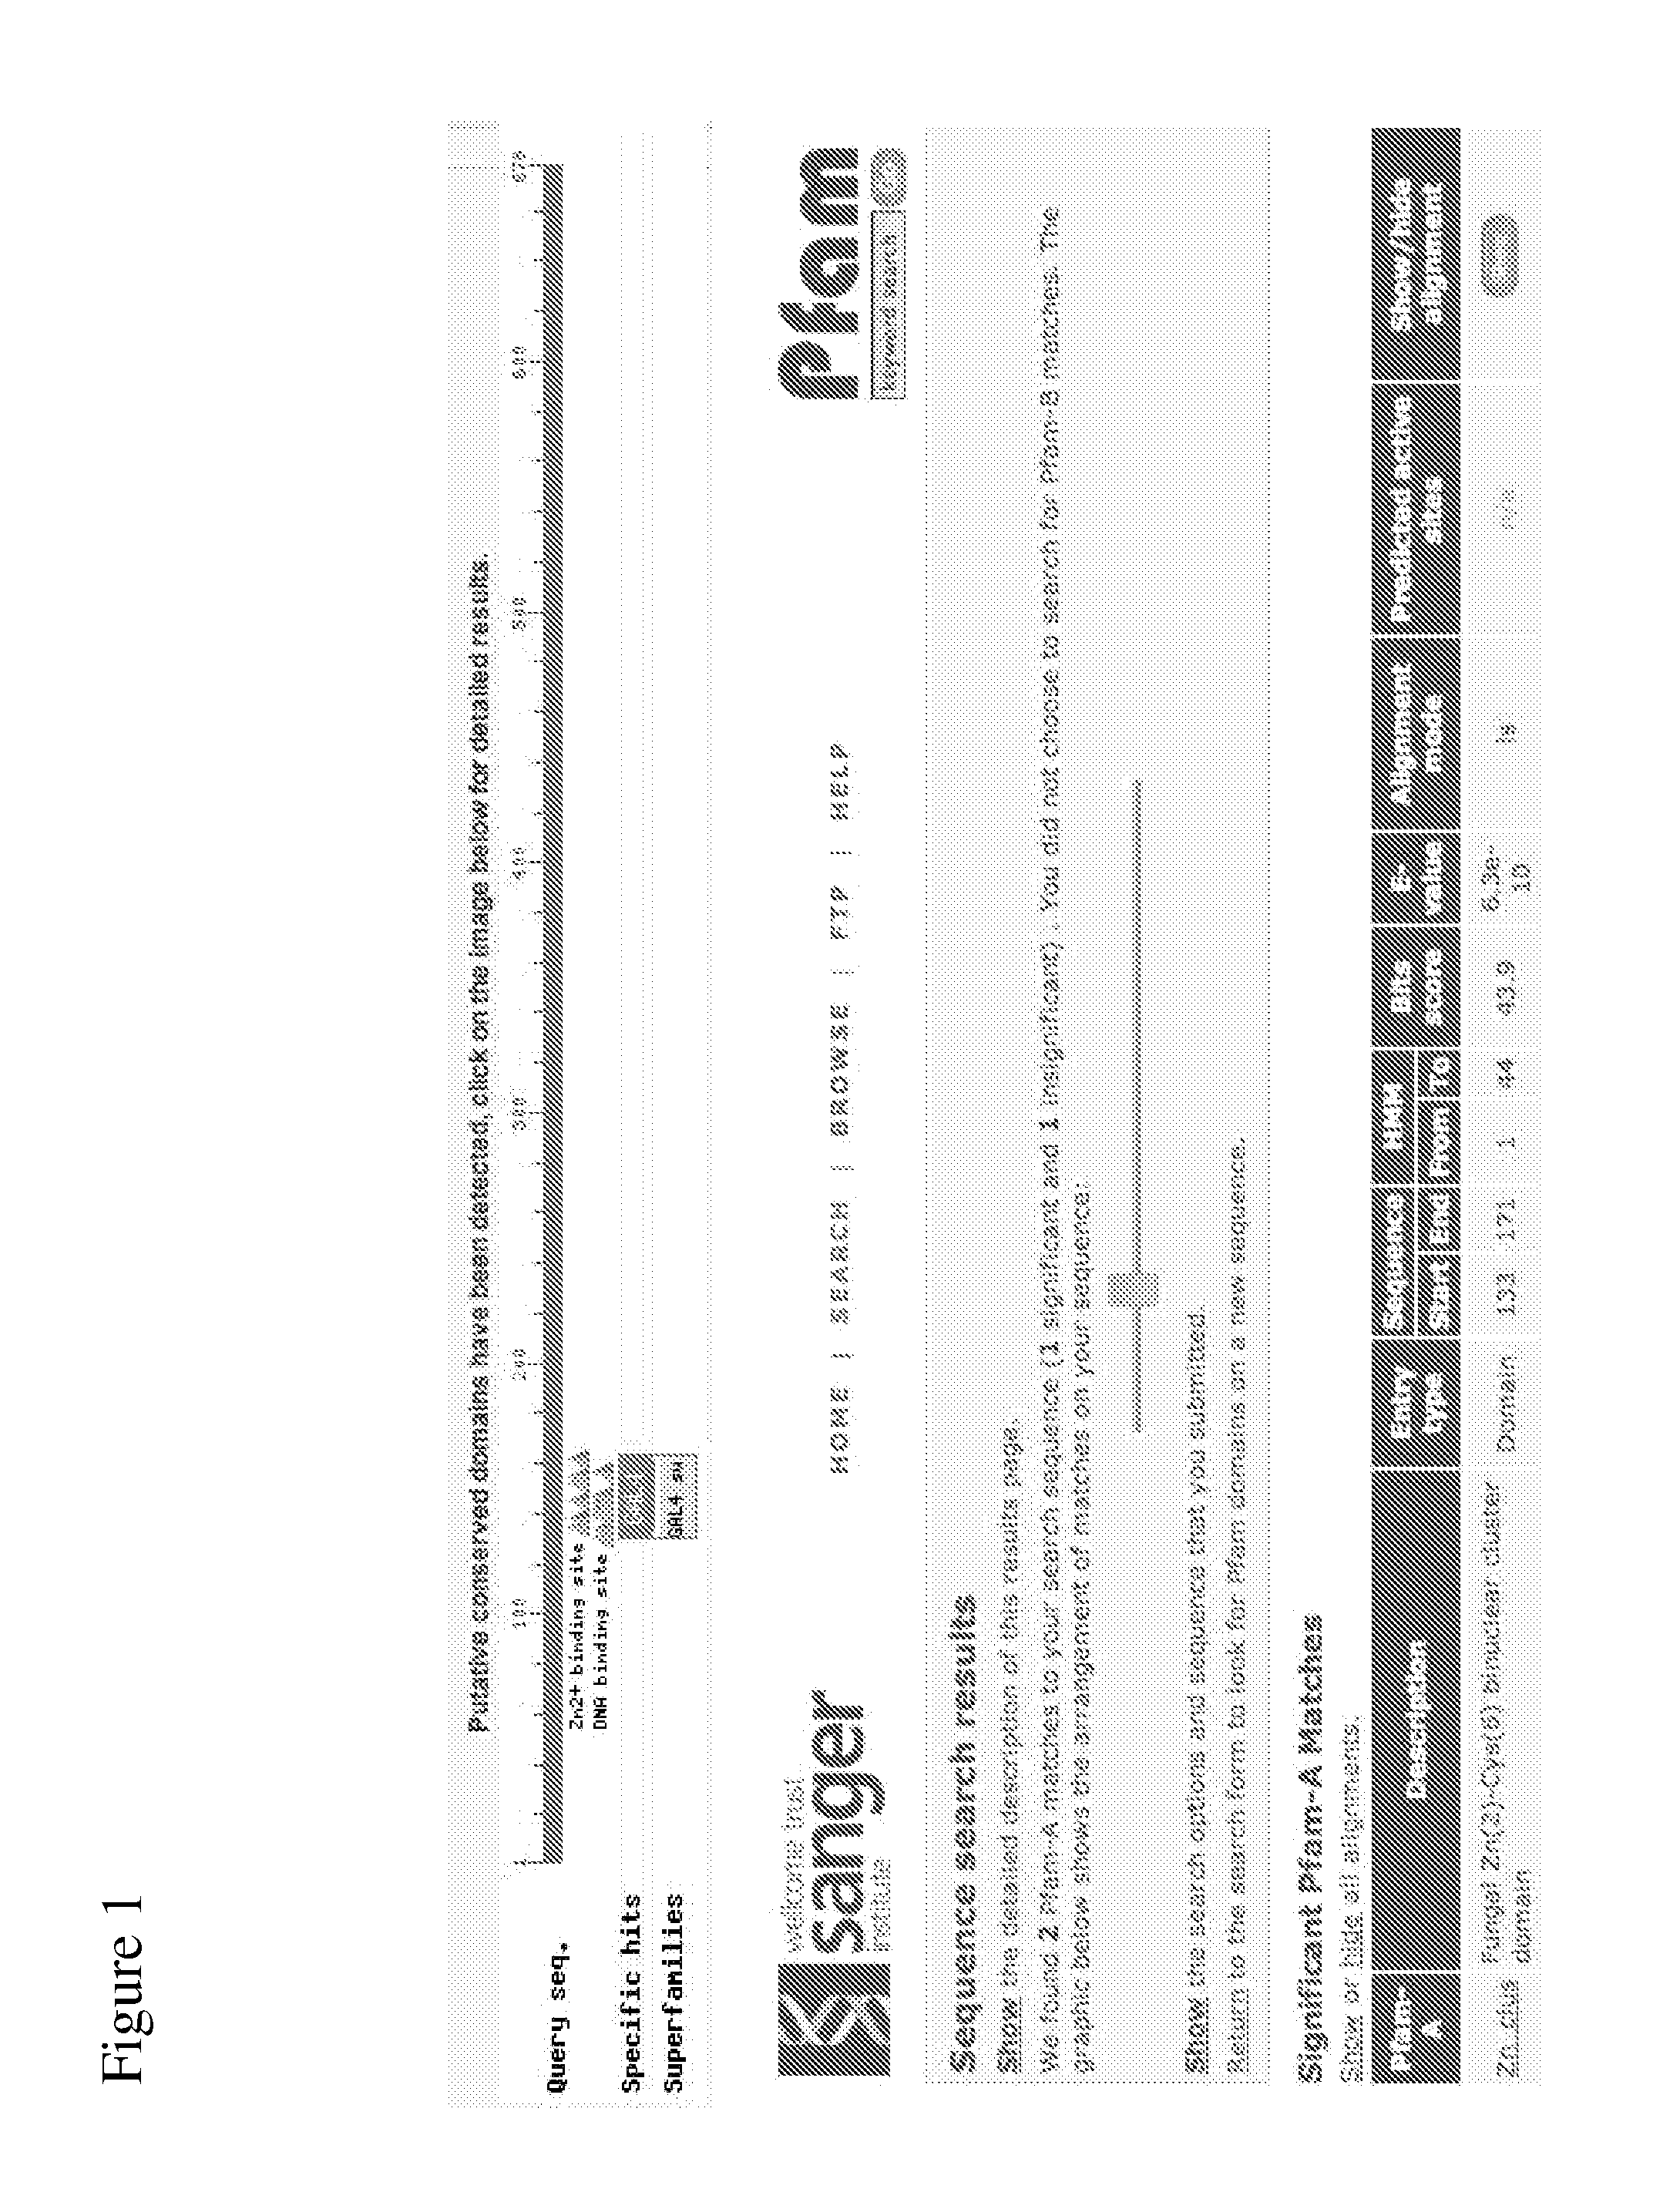 Methods and compositions for improving sugar transport, mixed sugar fermentation, and production of biofuels